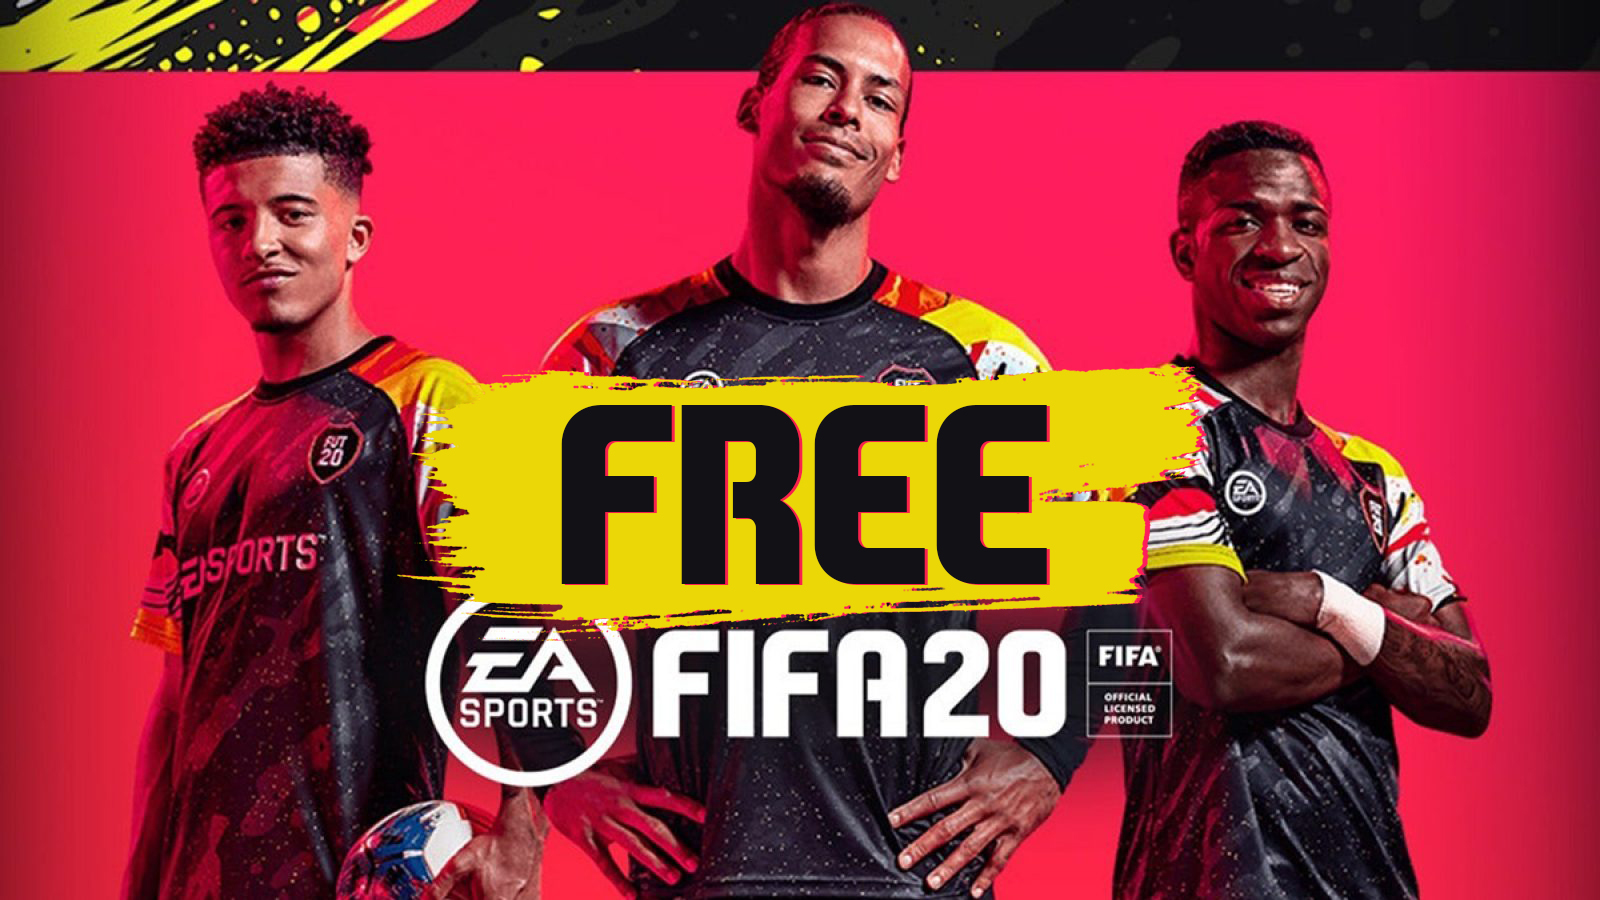 FIFA 20 Free Download Brush FIFA Games Evolution From 94 2020